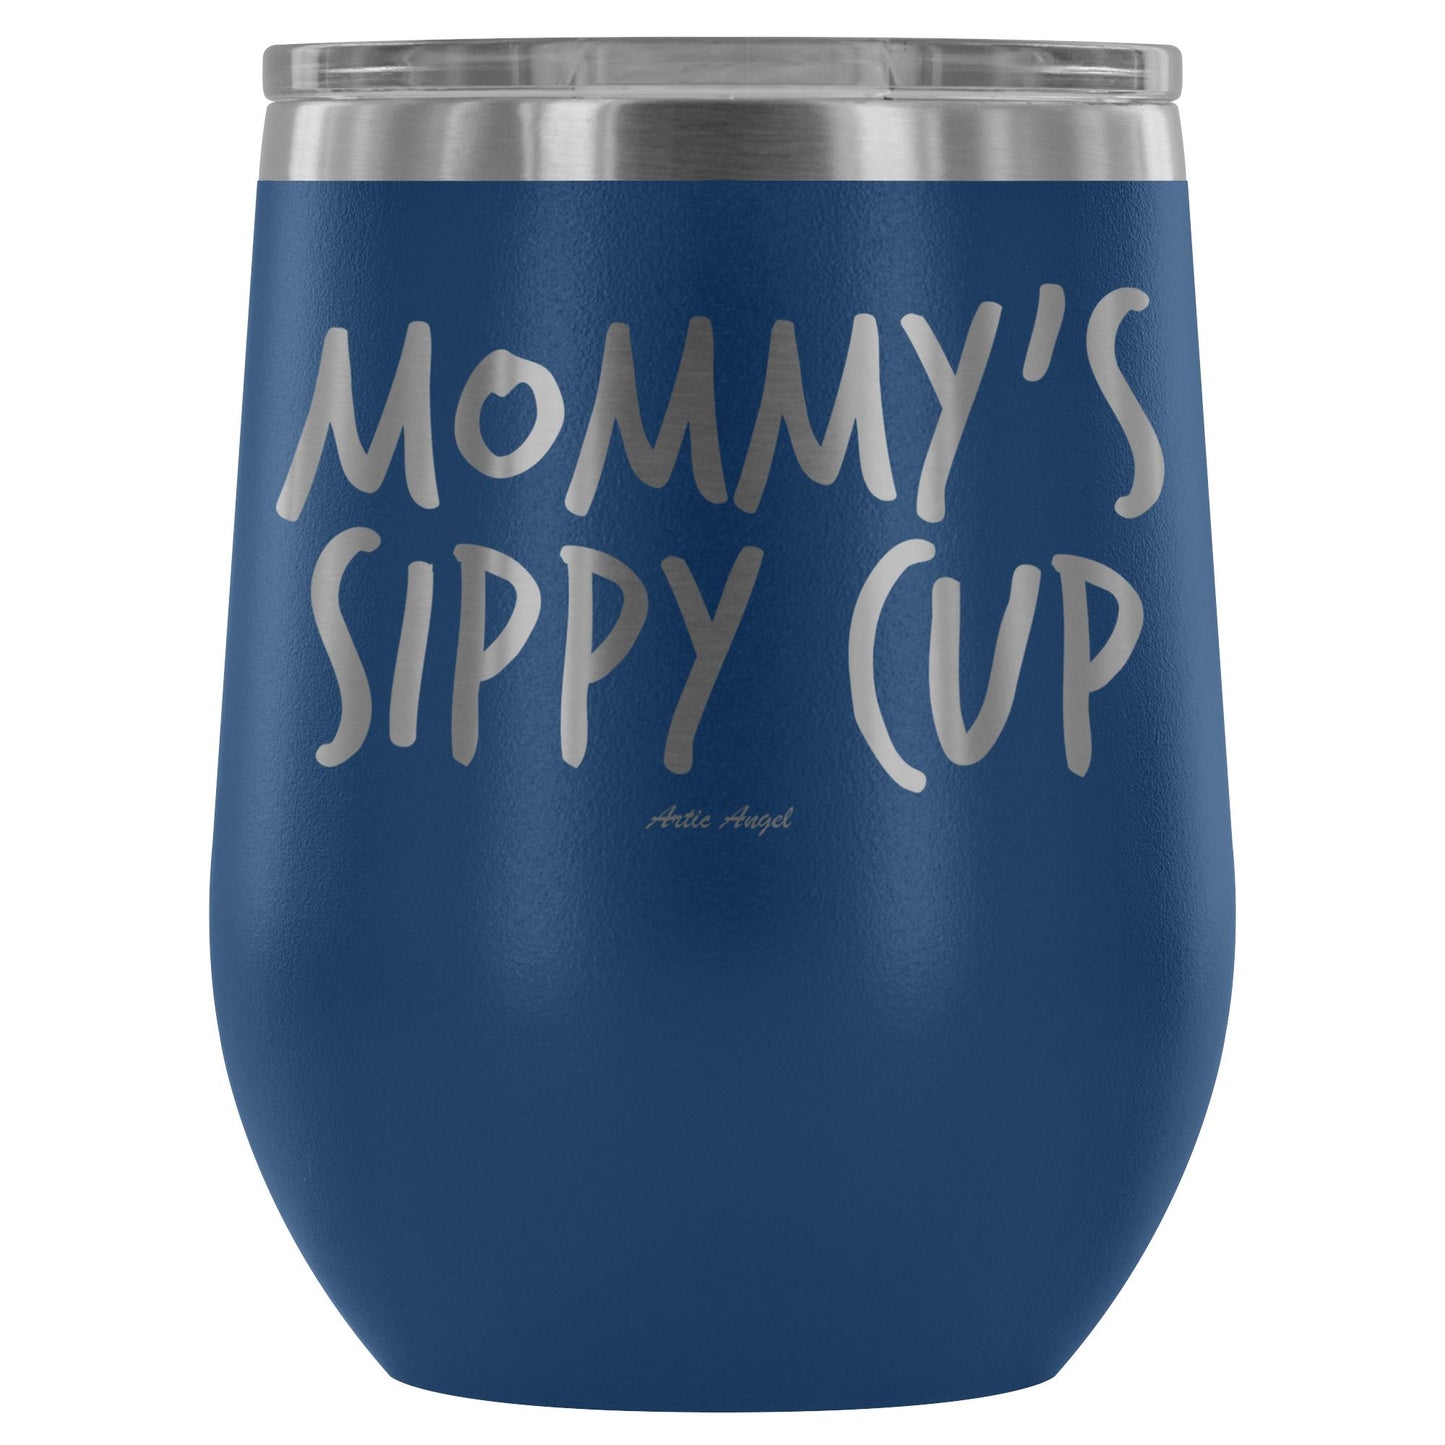 "Mommy's Sippy Cup" - Stemless Wine Cup Wine Tumbler Blue 